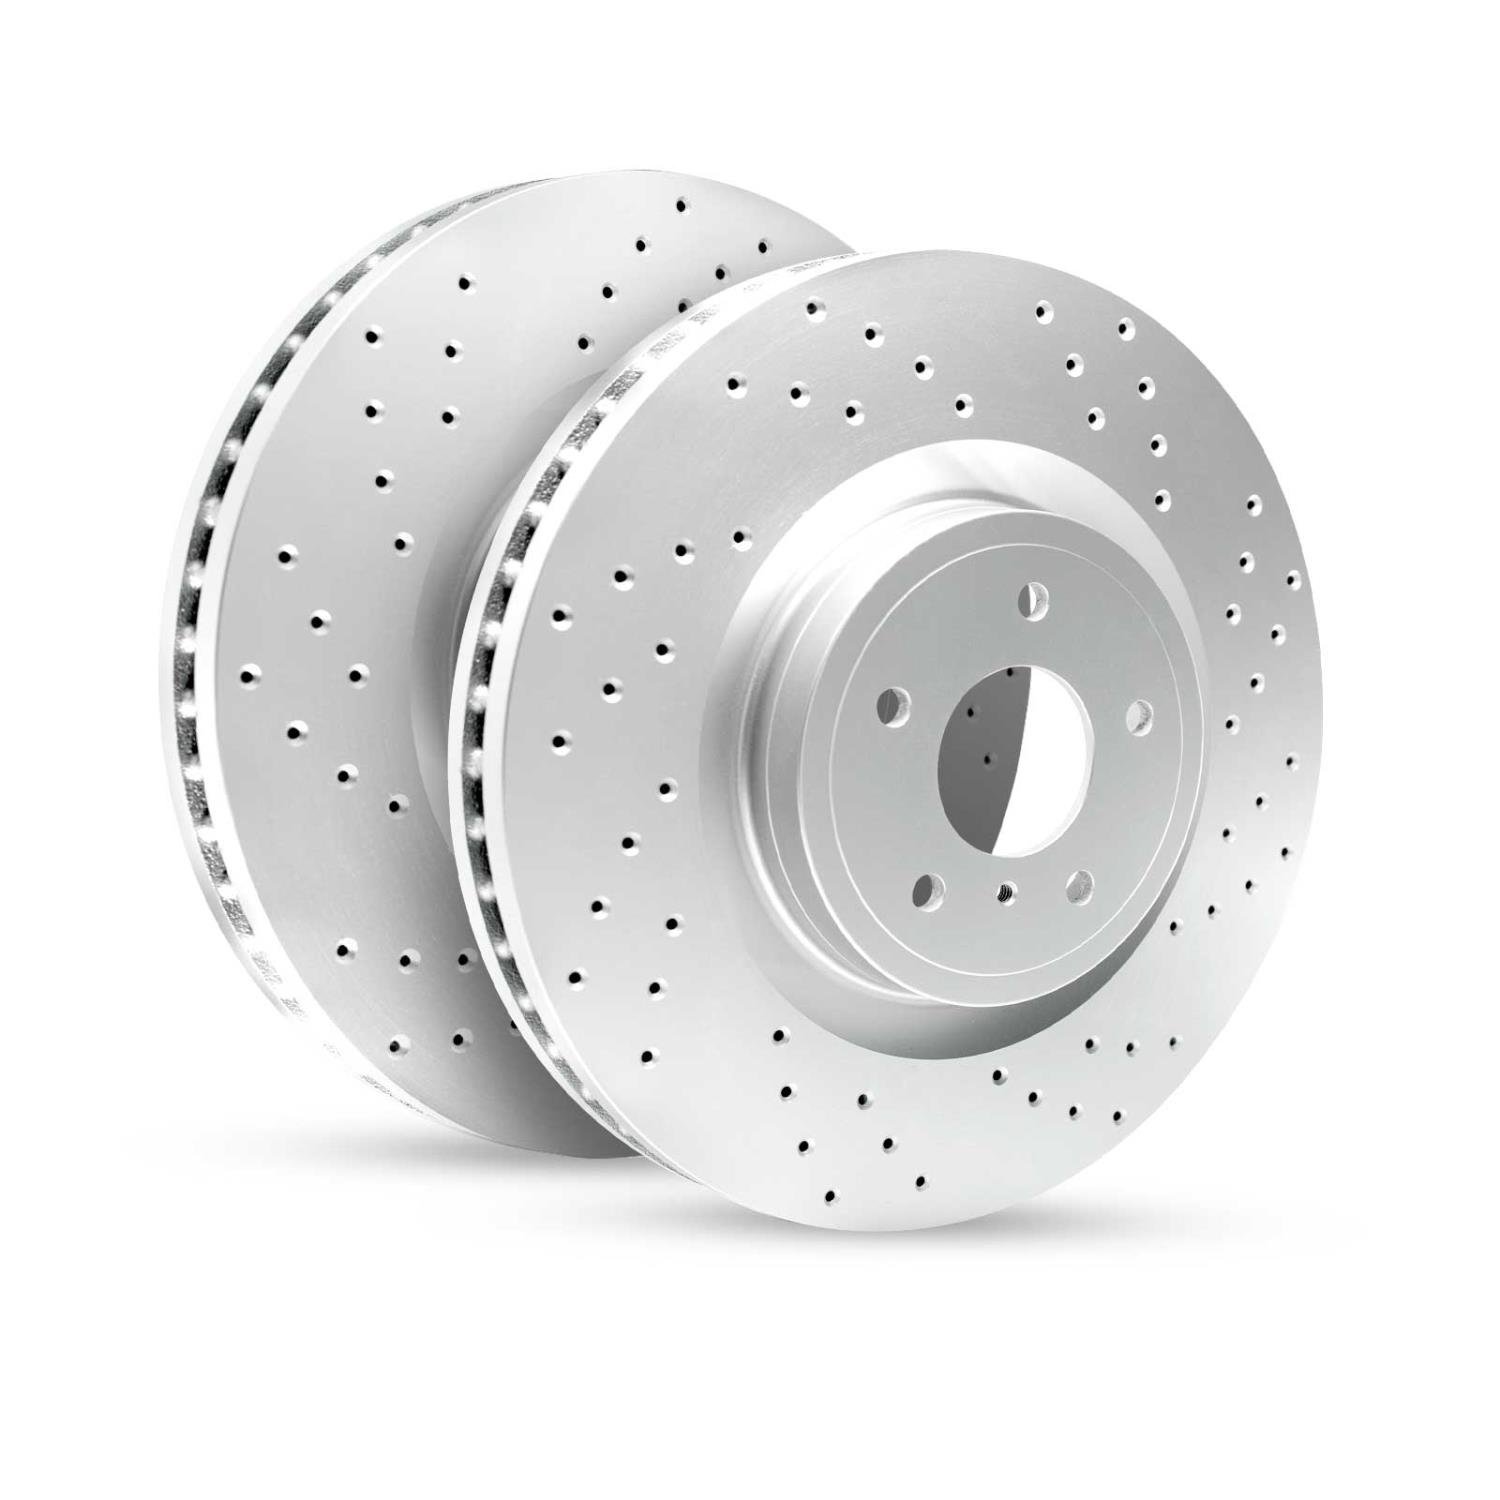 GEO-Carbon Drilled/Slotted Rotors, 2012-2019 Infiniti/Nissan,